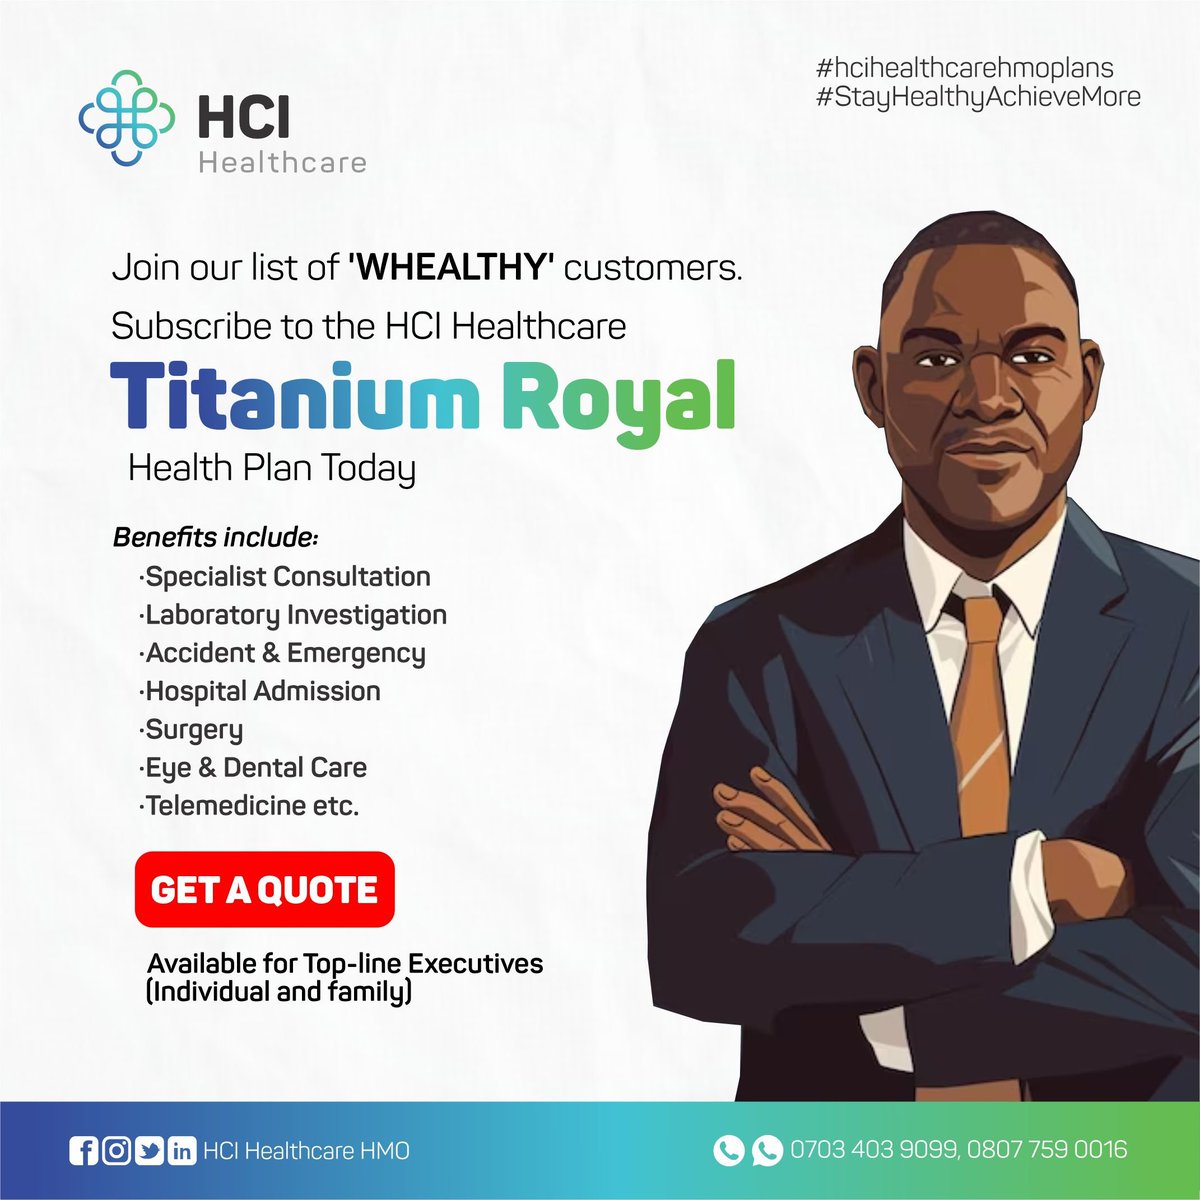 Join our list of WHEALTHY customers. 

Subscribe to our Titanium Royal Health Plan Today & enjoy up to N1,070,000 limit.

Click bit.ly/3HMusXZ to see full benefits or  bit.ly/HCIWa to talk to an agent. 

#executivedirector #managingdirector #businessowner